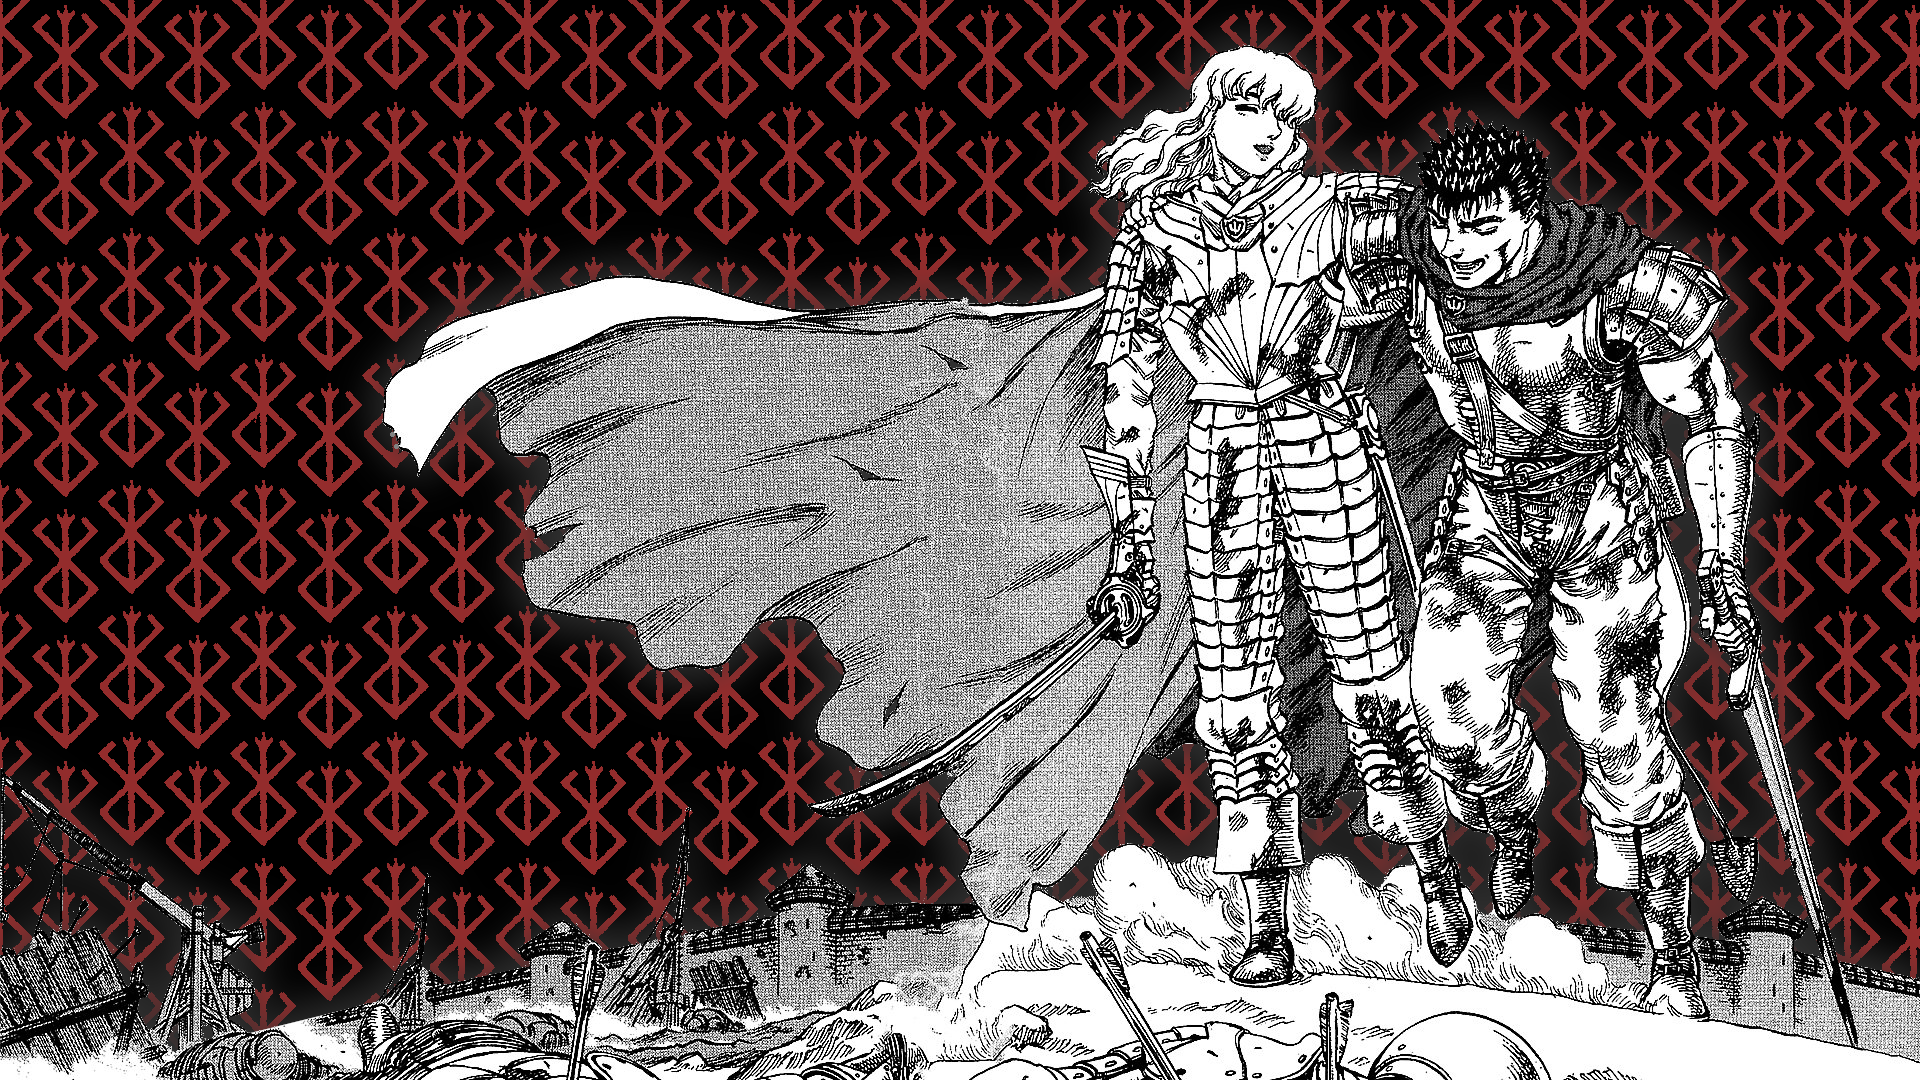 Guts and Griffith wallpaper with black background